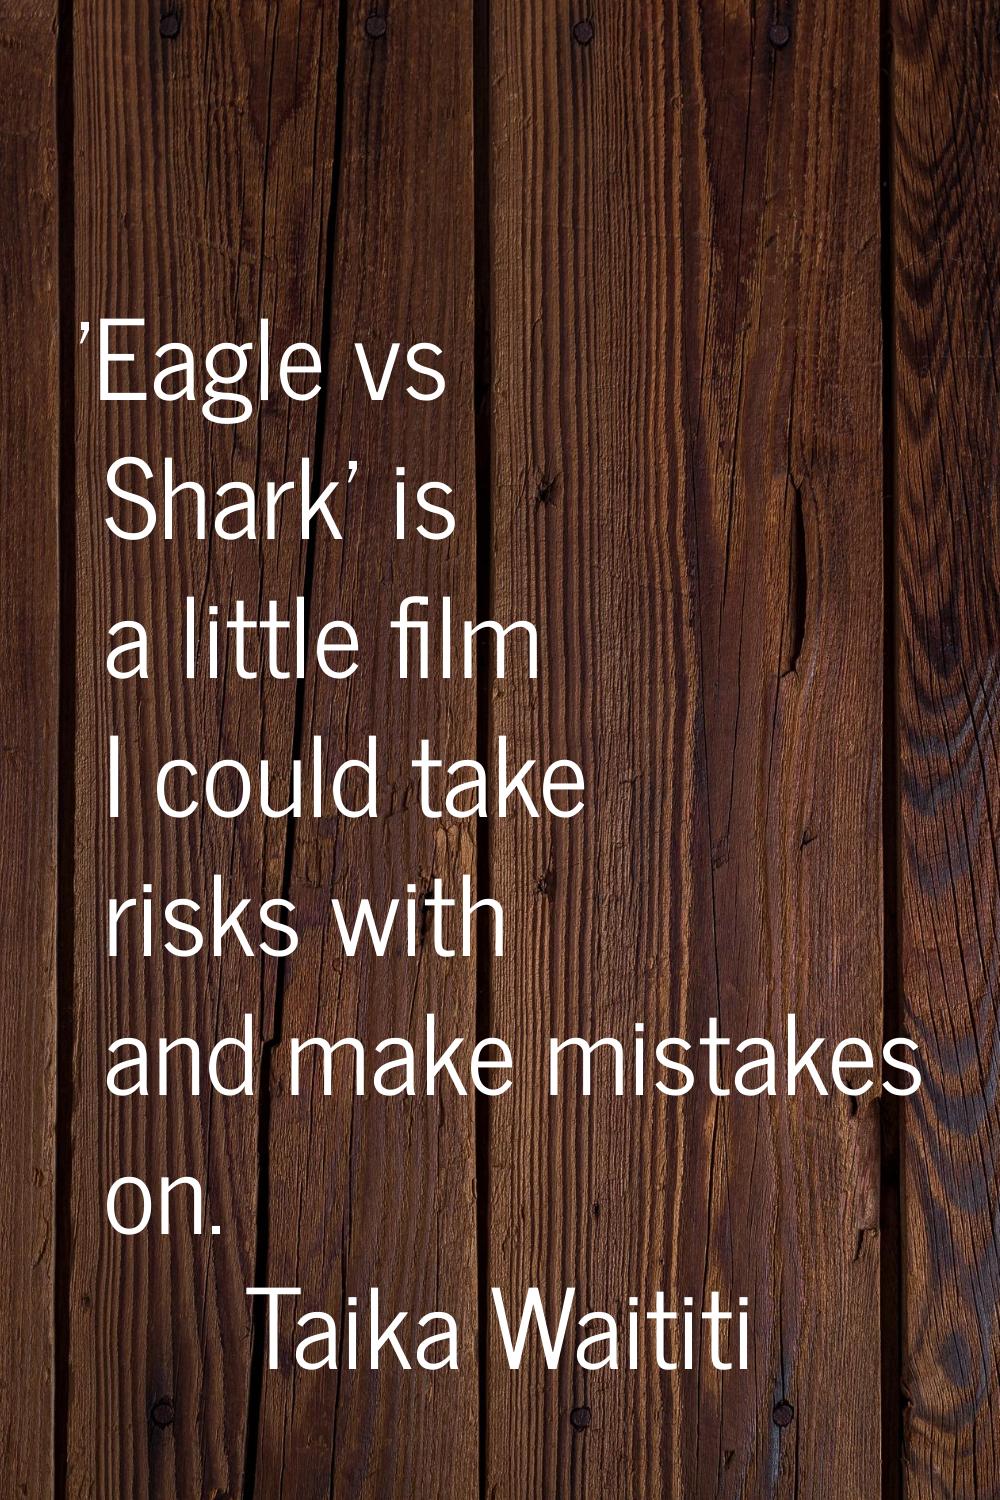 'Eagle vs Shark' is a little film I could take risks with and make mistakes on.